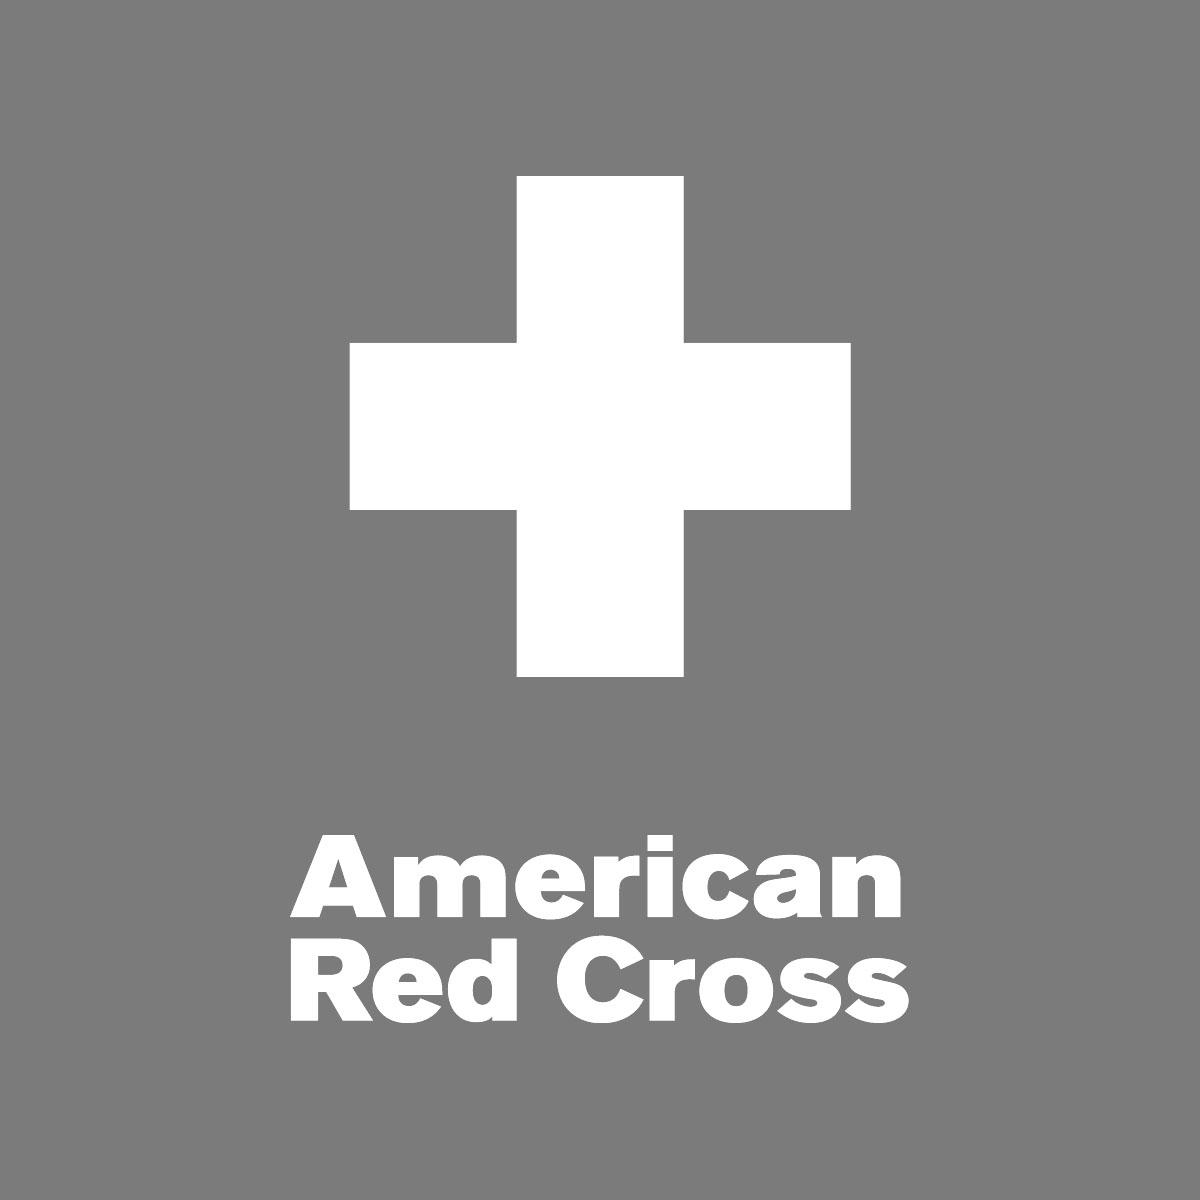 Red Black and White Cross Logo - American Red Cross - Twilio.org